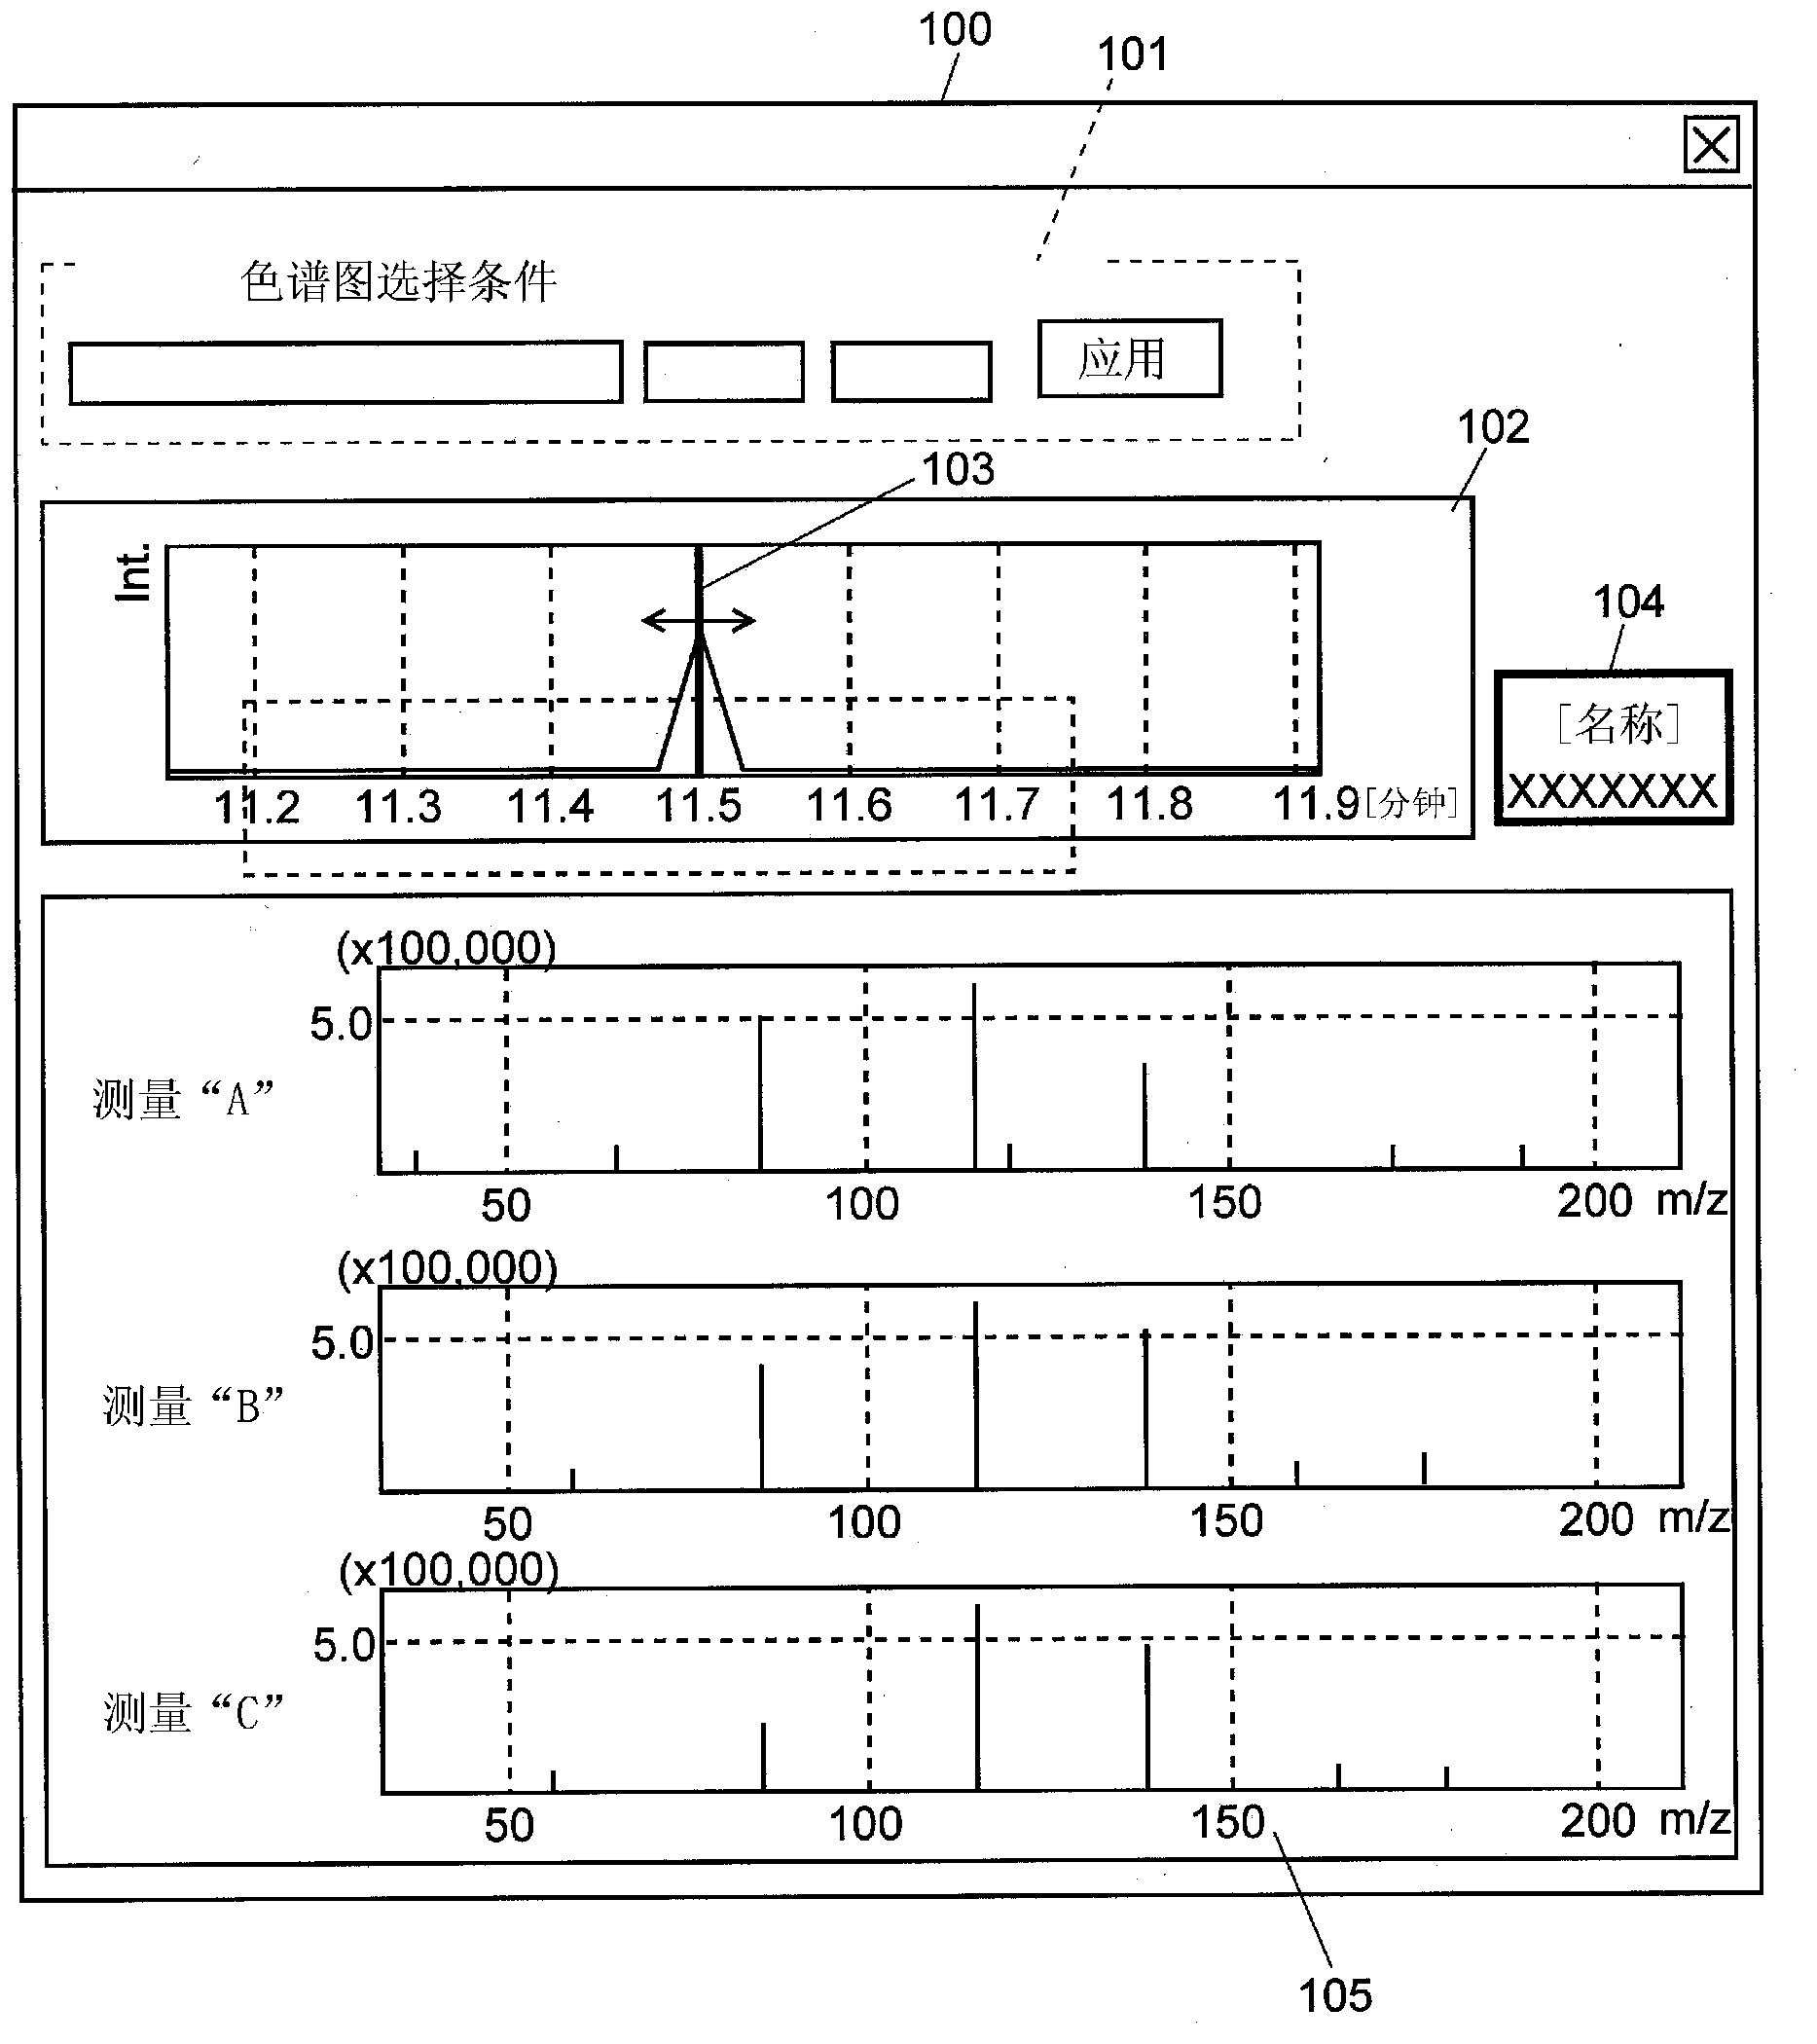 Data-processing system for chromatographic mass spectrometry